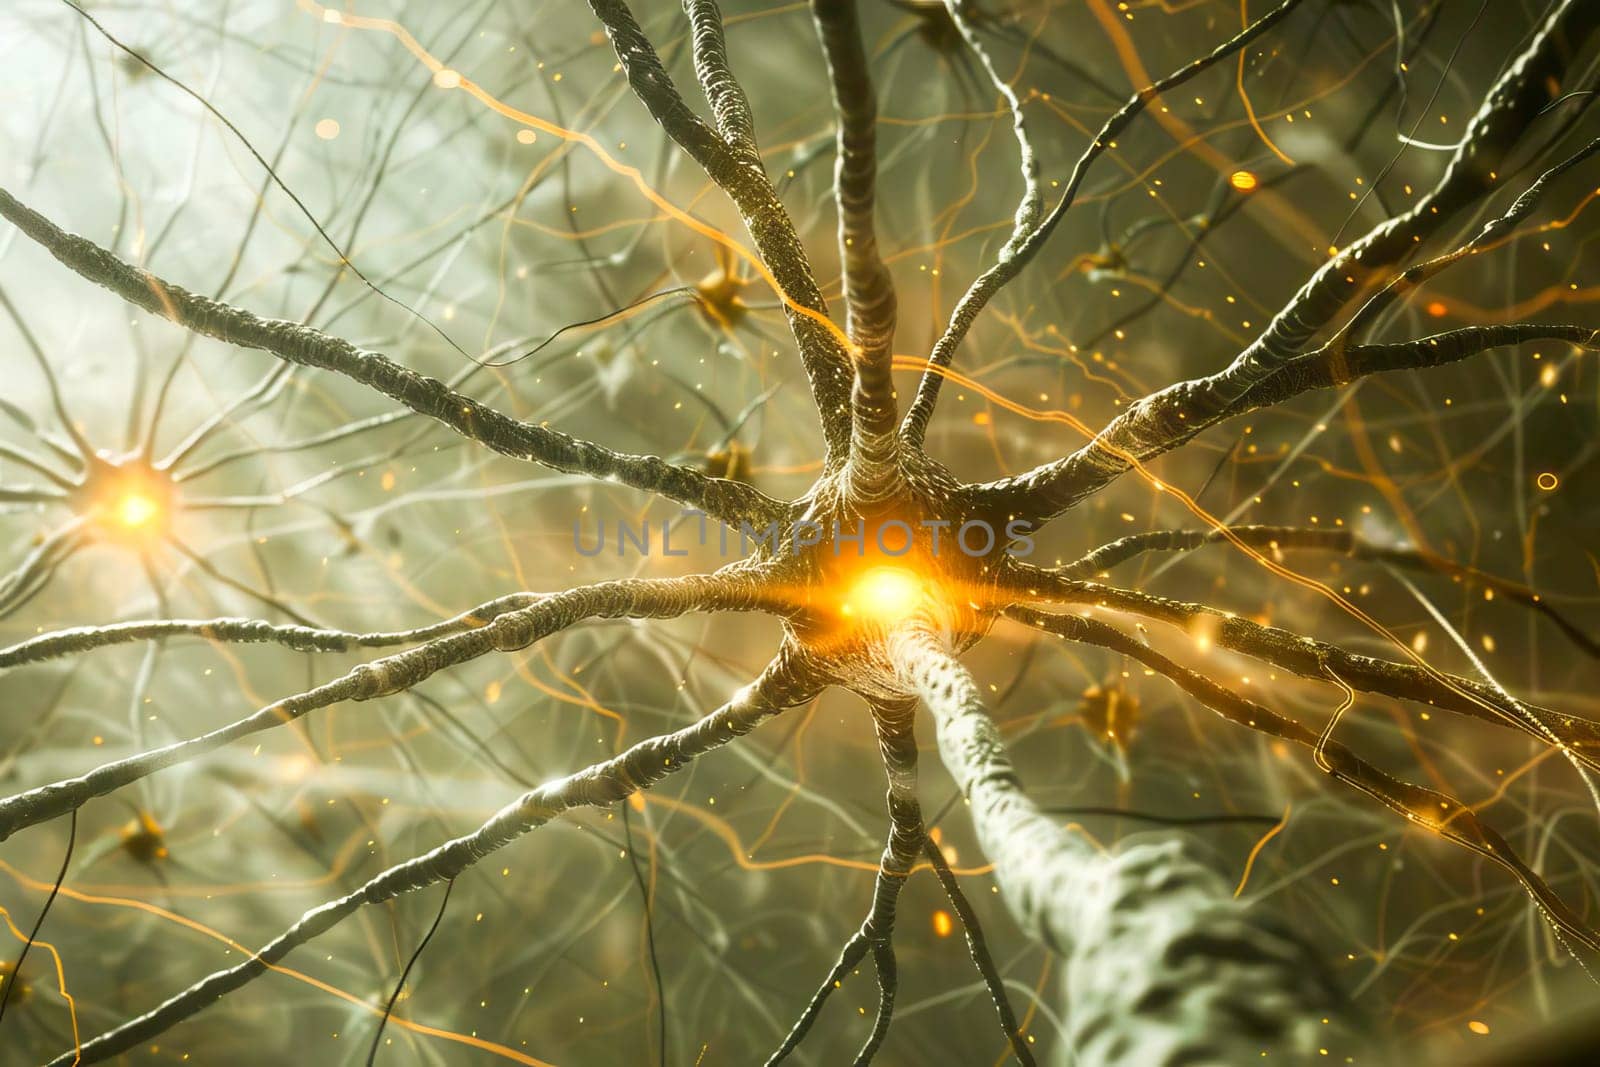 Neurons interconnect with bright signals representing brain activity by vladimka